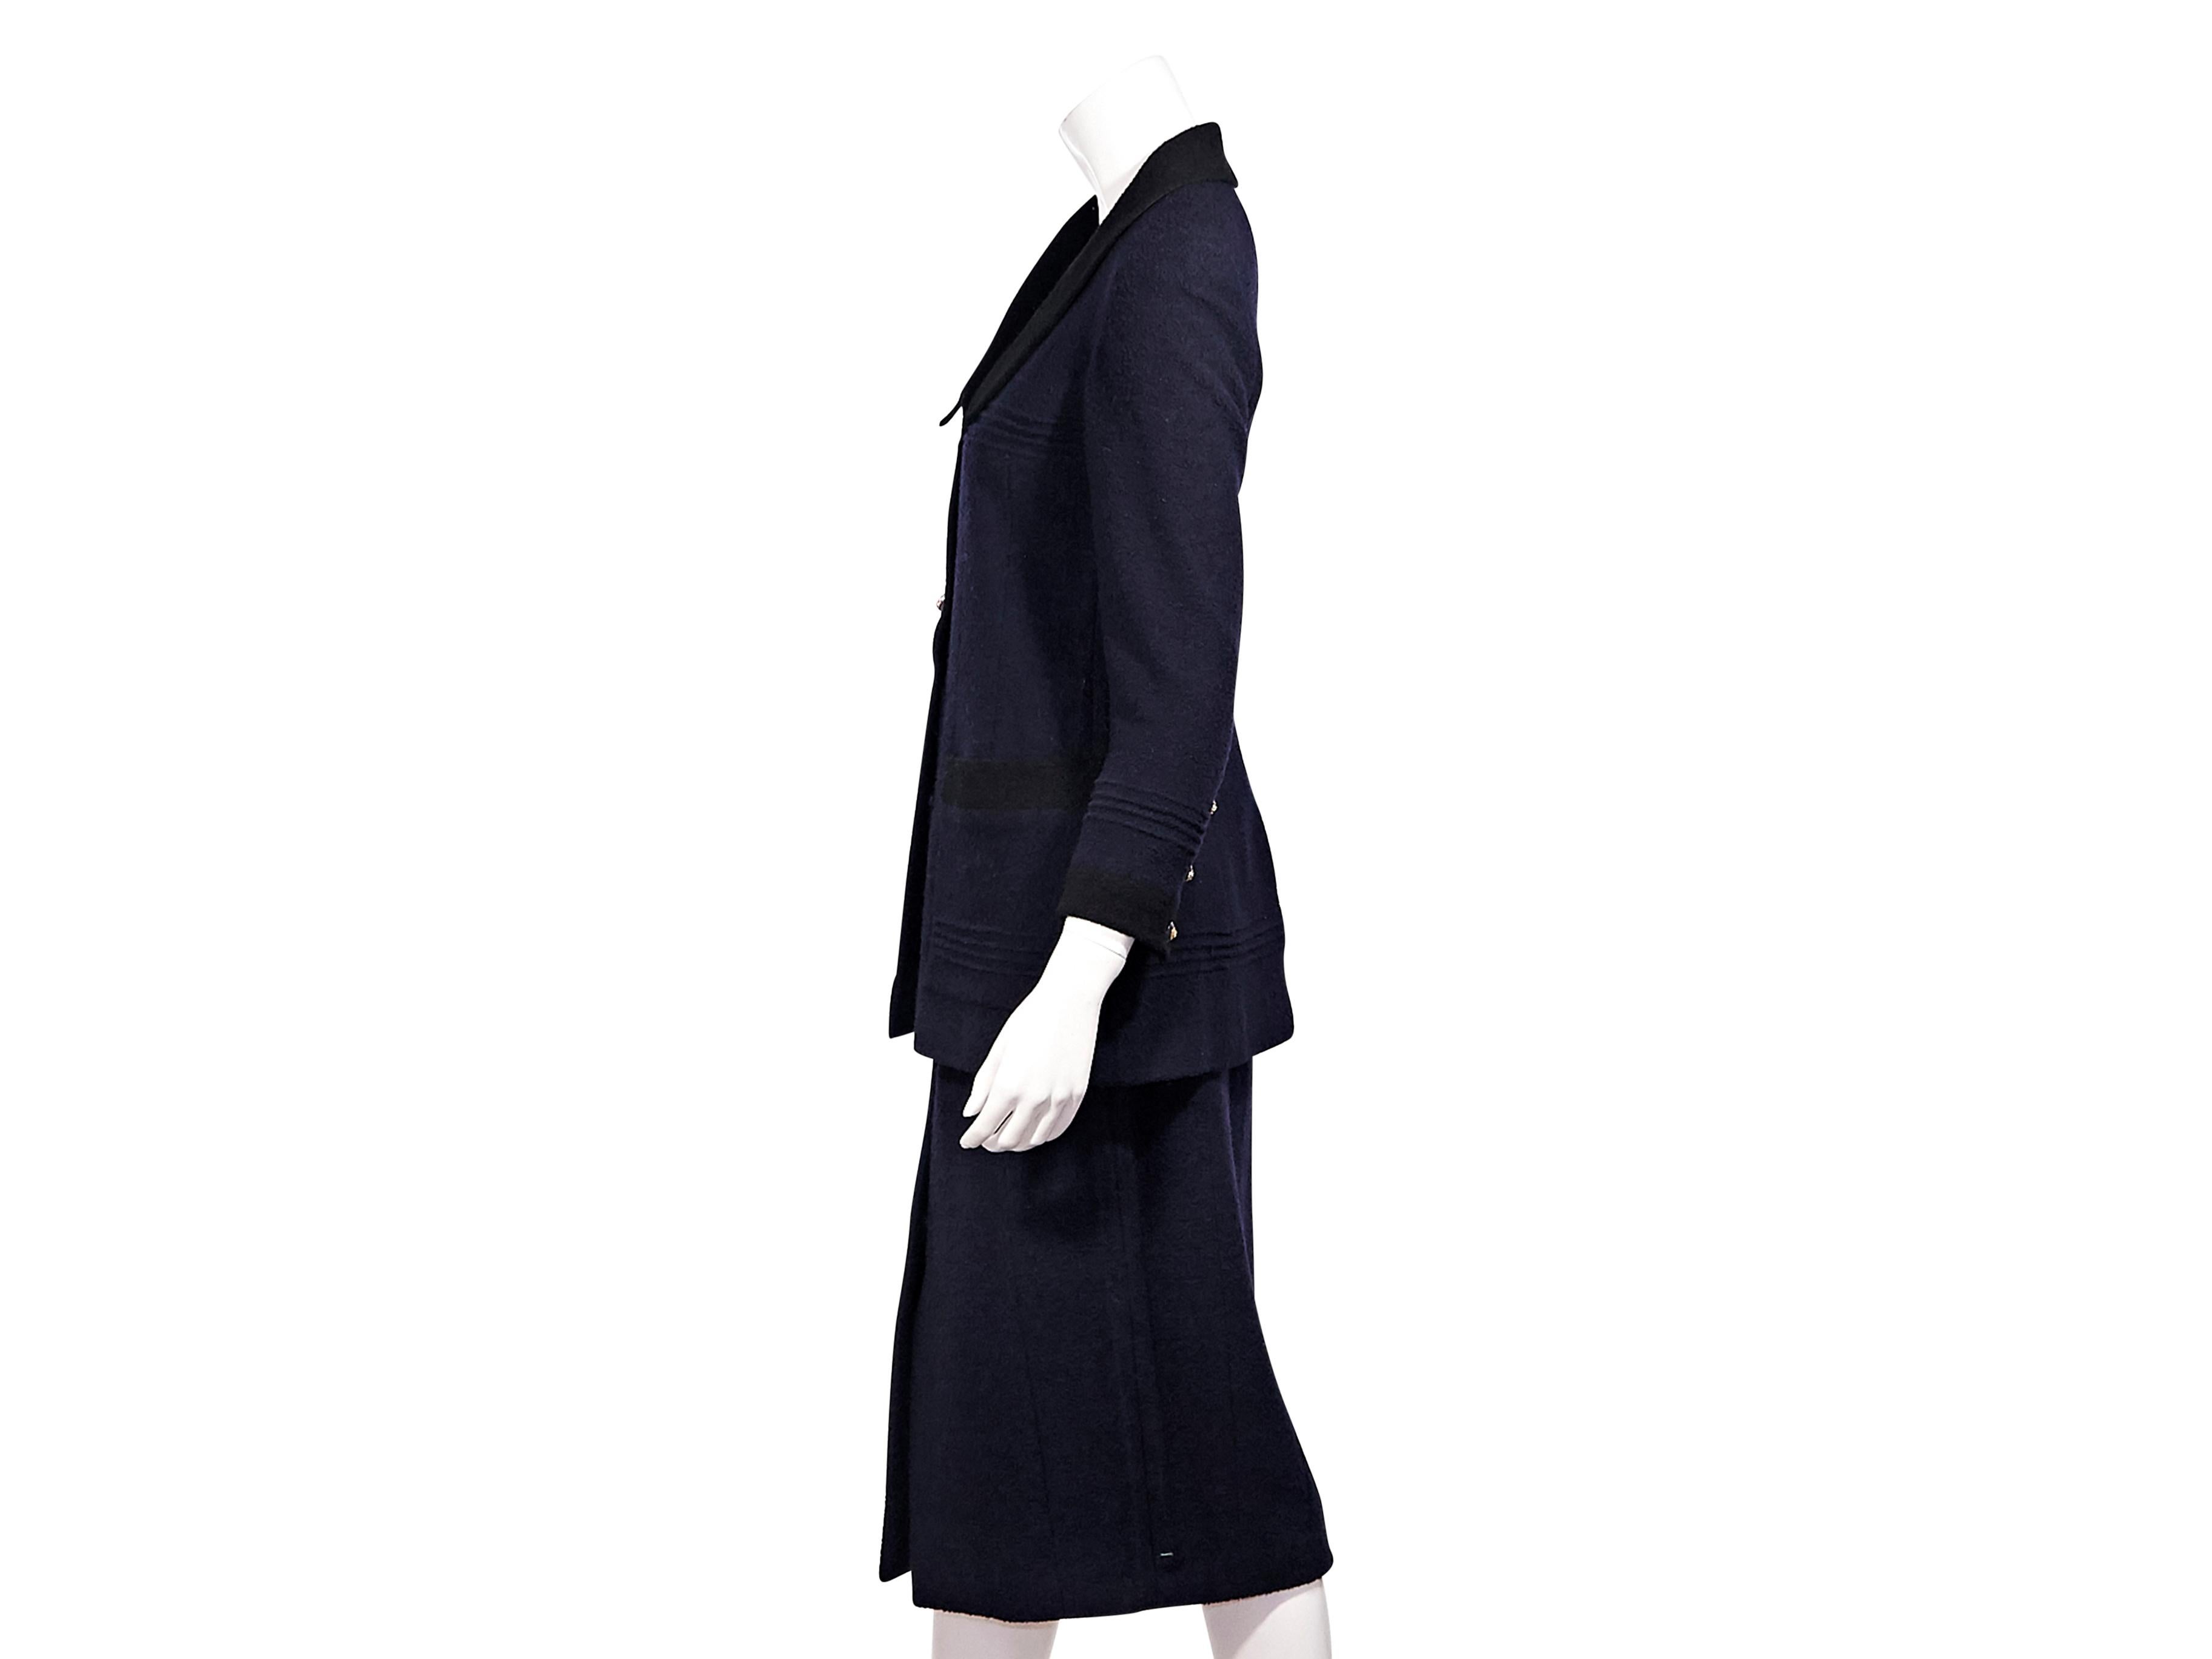 Product details:  Vintage navy blue boucle wool skirt suit set by Chanel.  From the Fall/Winter 1993 collection.  Long sleeves.  Three-button detail at cuffs.  Button-front closure.  Back center hem vent.  Matching skirt.  Banded waist. 